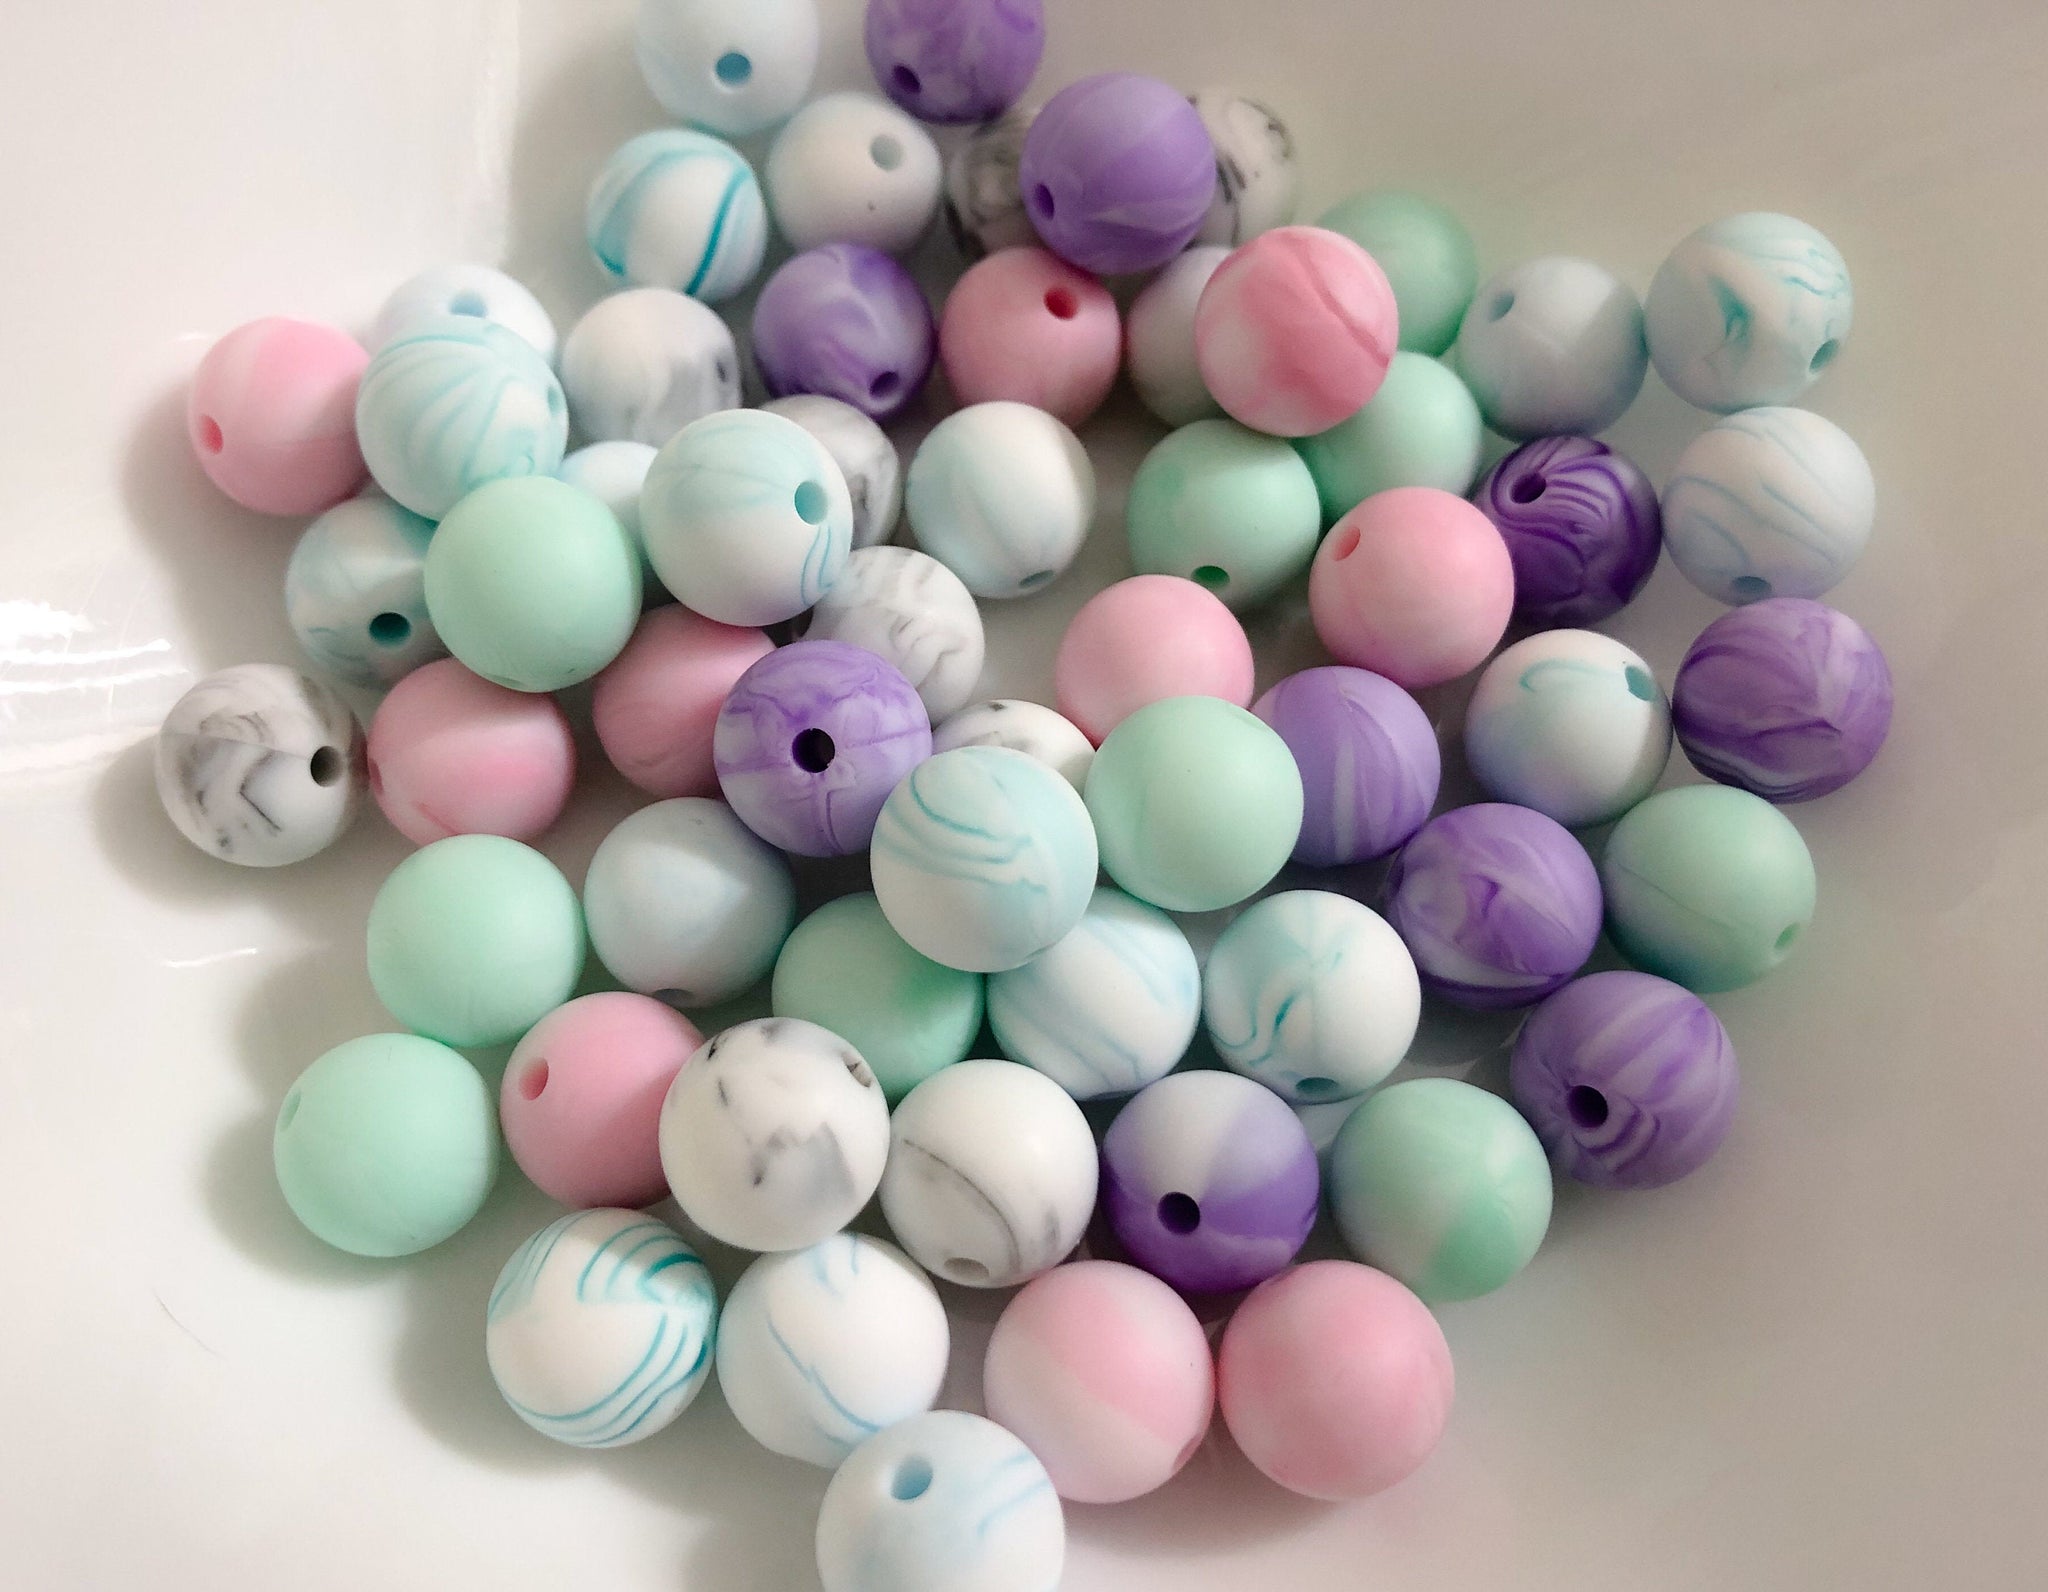 Wholesale Wholesale Price Elastic Colorful Round Ball Beads